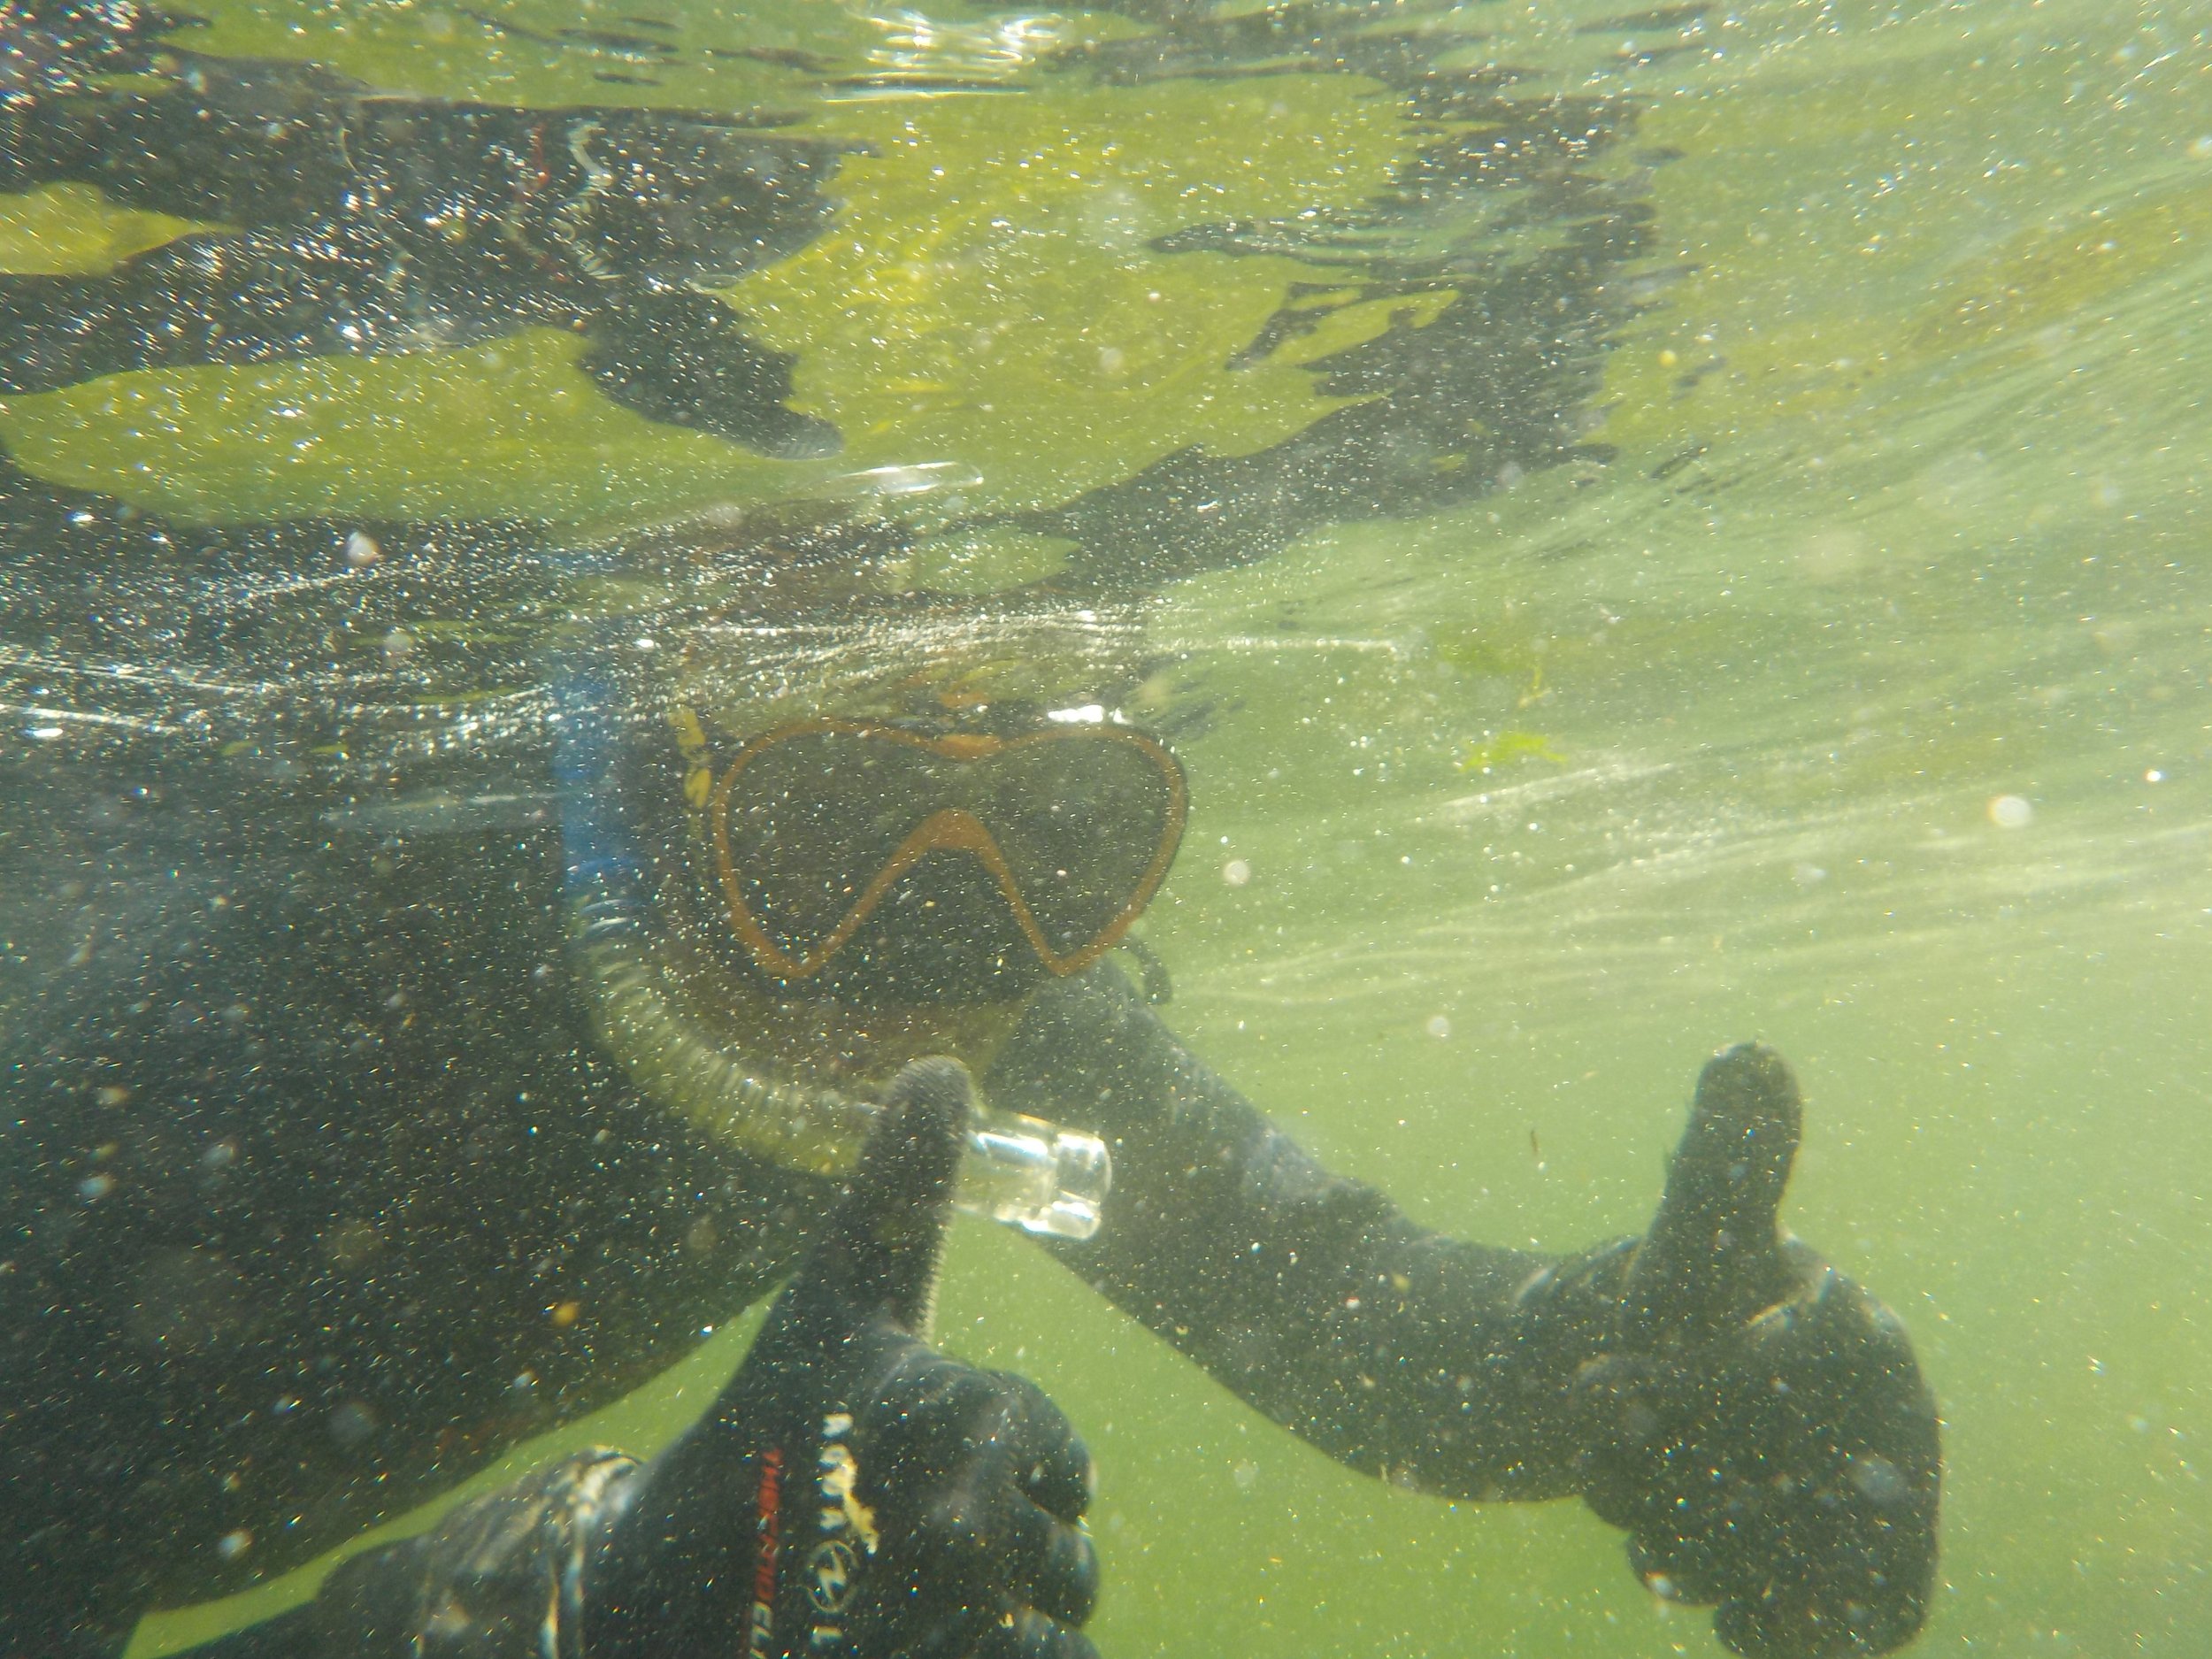  Interns participated in the Salmon River Restoration Council’s Spring Chinook Dives, a collaborative effort to document presence of Spring Chinook to monitor population size and health of this endangered species. 